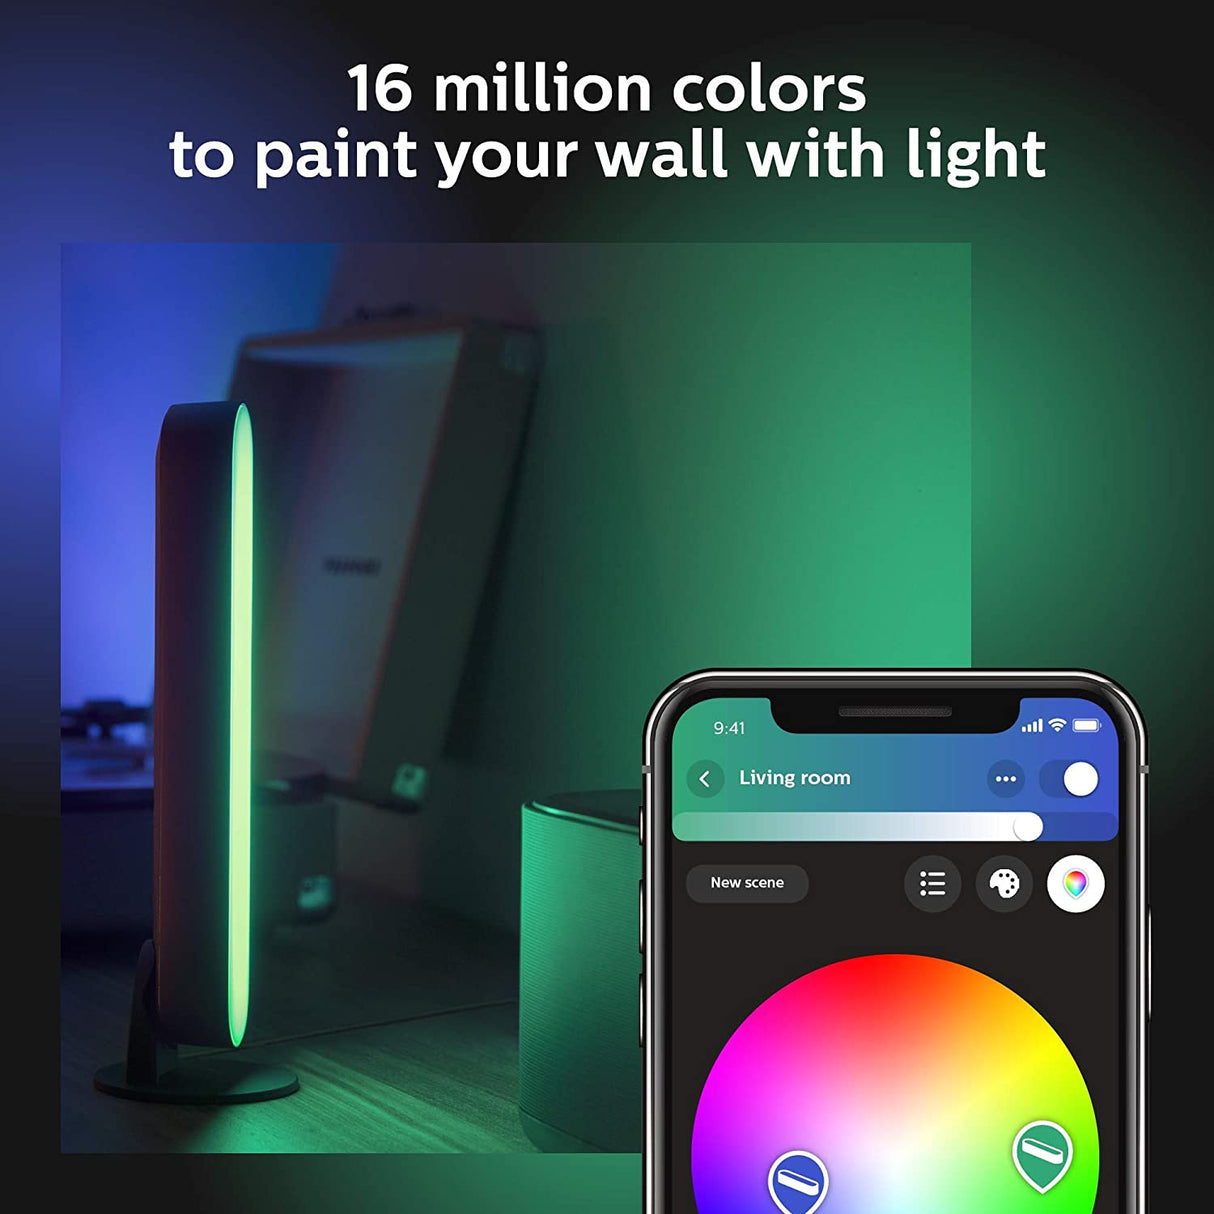 Philips Hue Play White &amp; Color Smart Light Extension, Hub Required/NO Power supply included (Smart Lighting Compatibility with Amazon Alexa, Apple Homekit &amp; Google Home) Extension (No Plug) Black